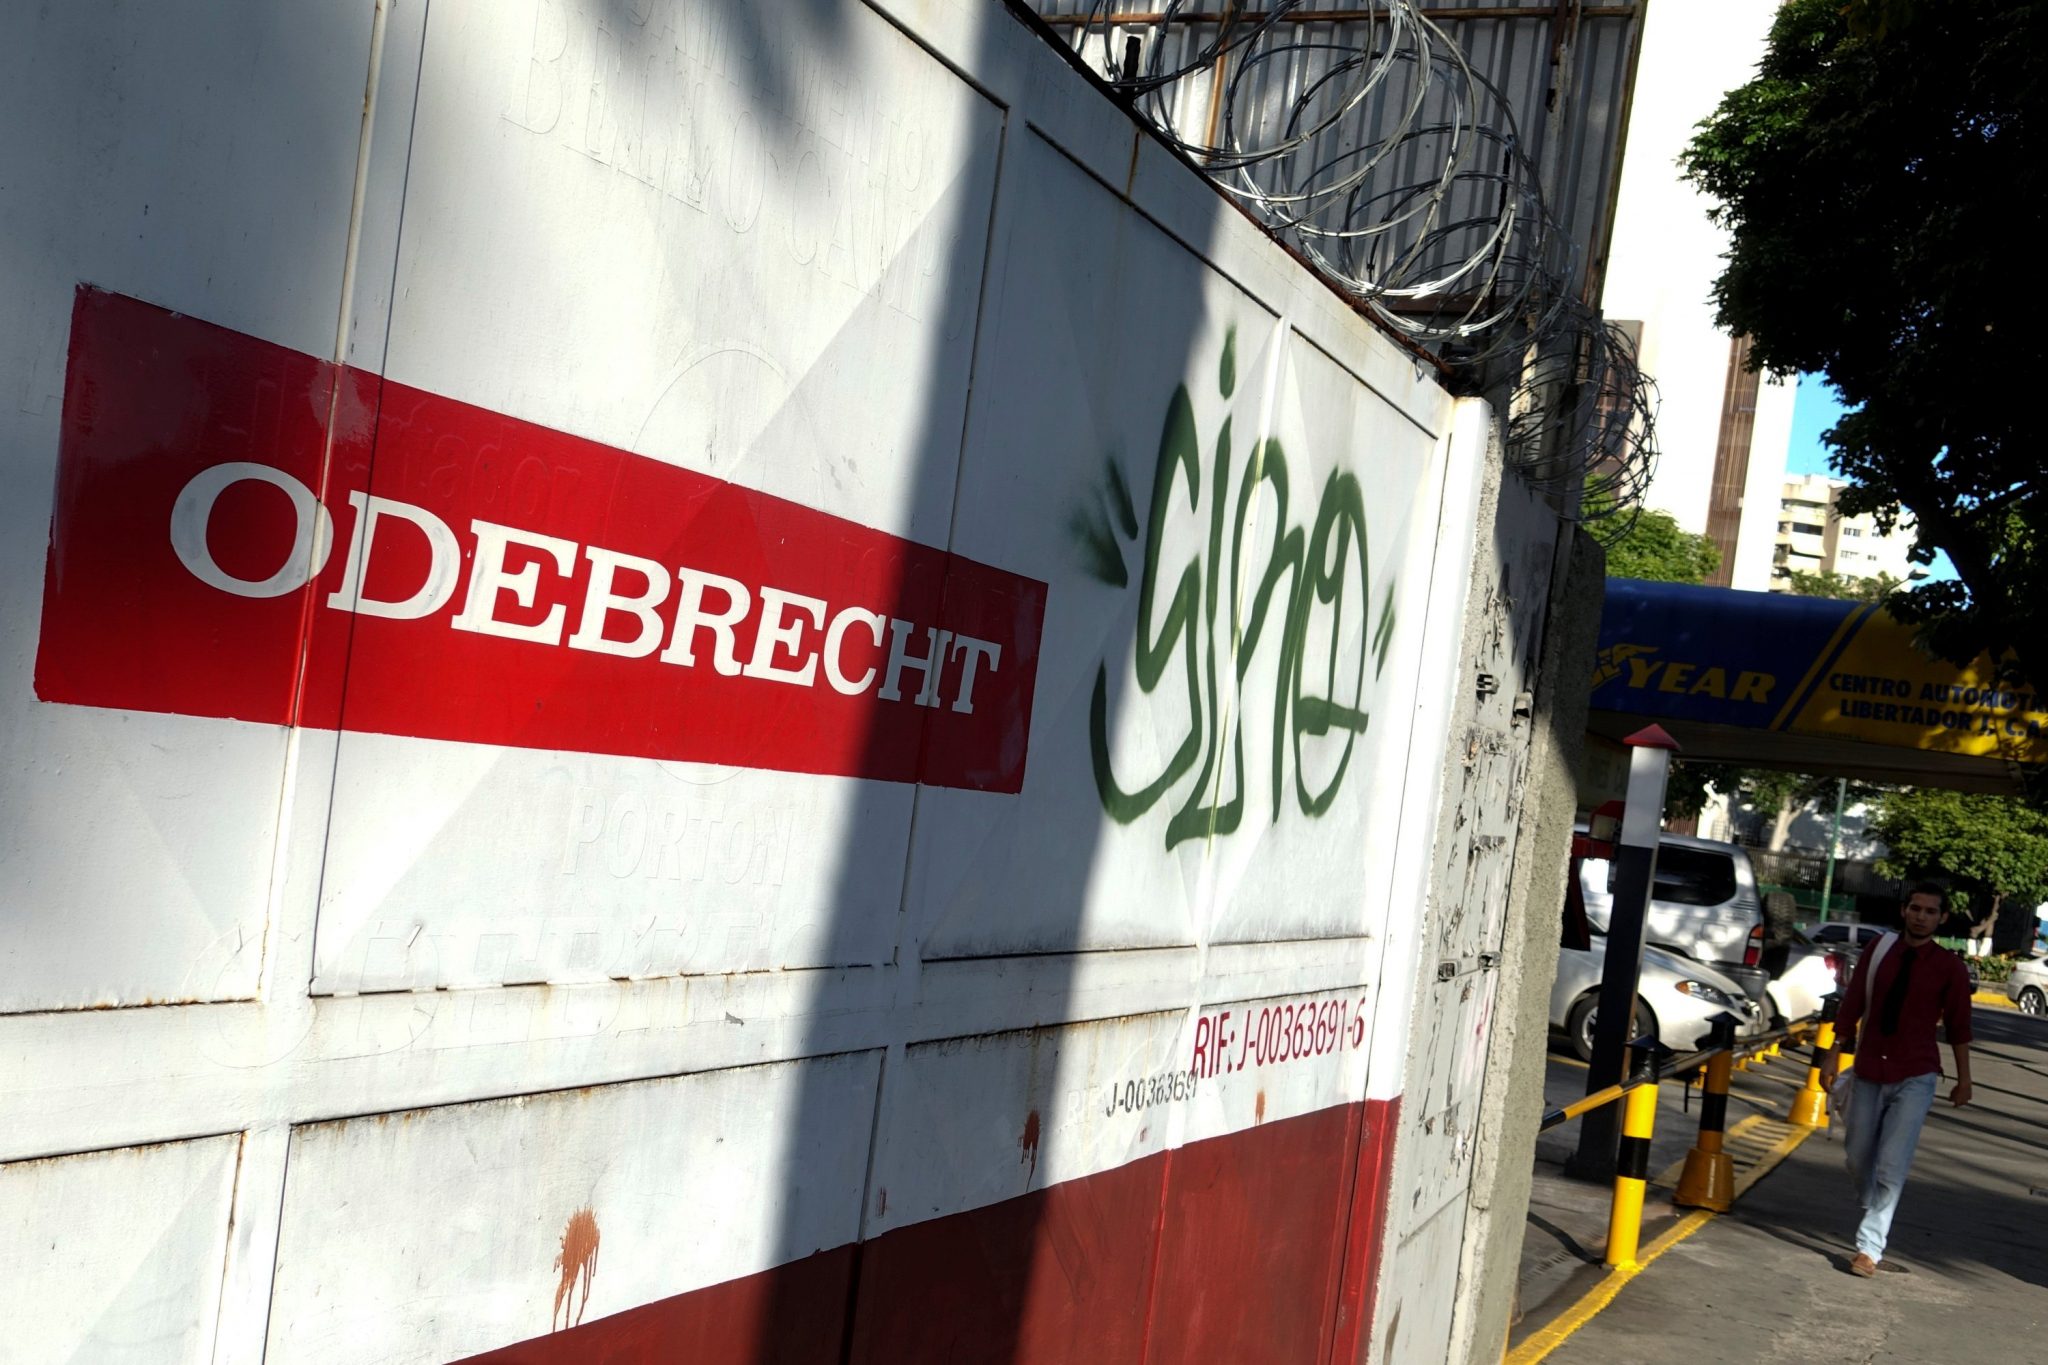 A man walks past the corporate logo of Odebrecht in a construction site in Caracas, Venezuela January 26, 2017. REUTERS/Carlos Garcia Rawlins